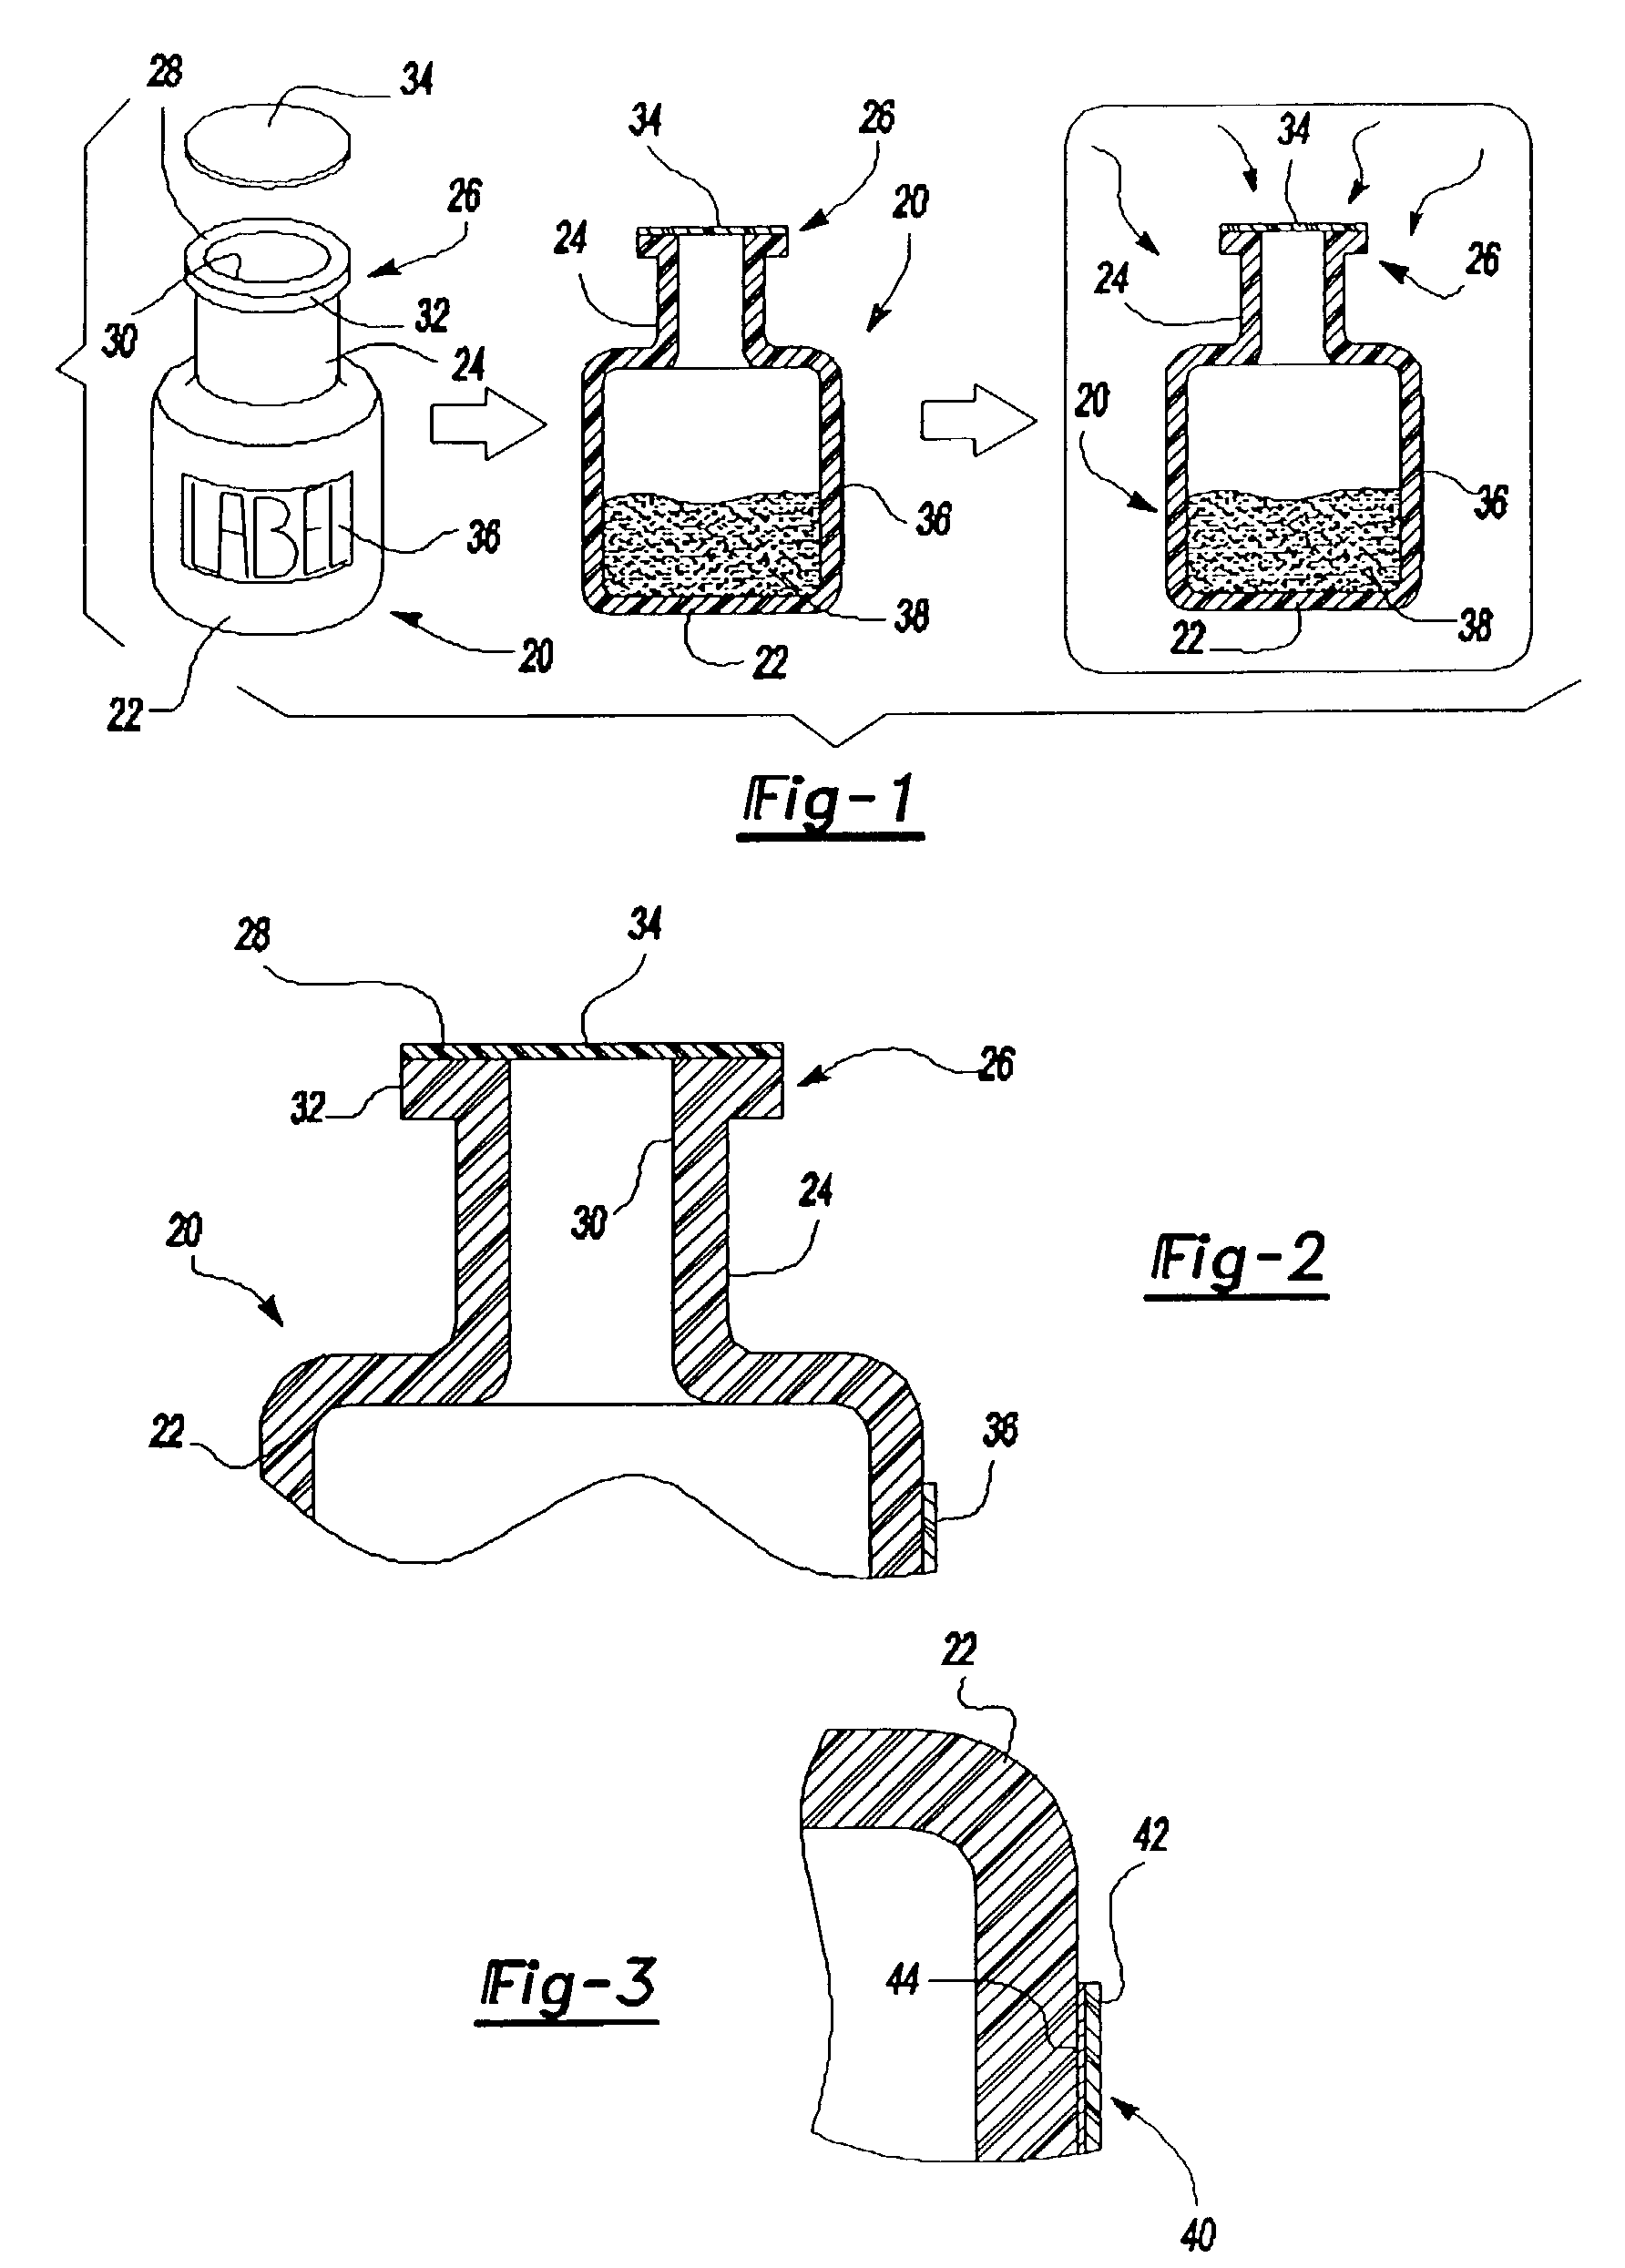 Method of fusing a component to a medical storage of transfer device and container assembly